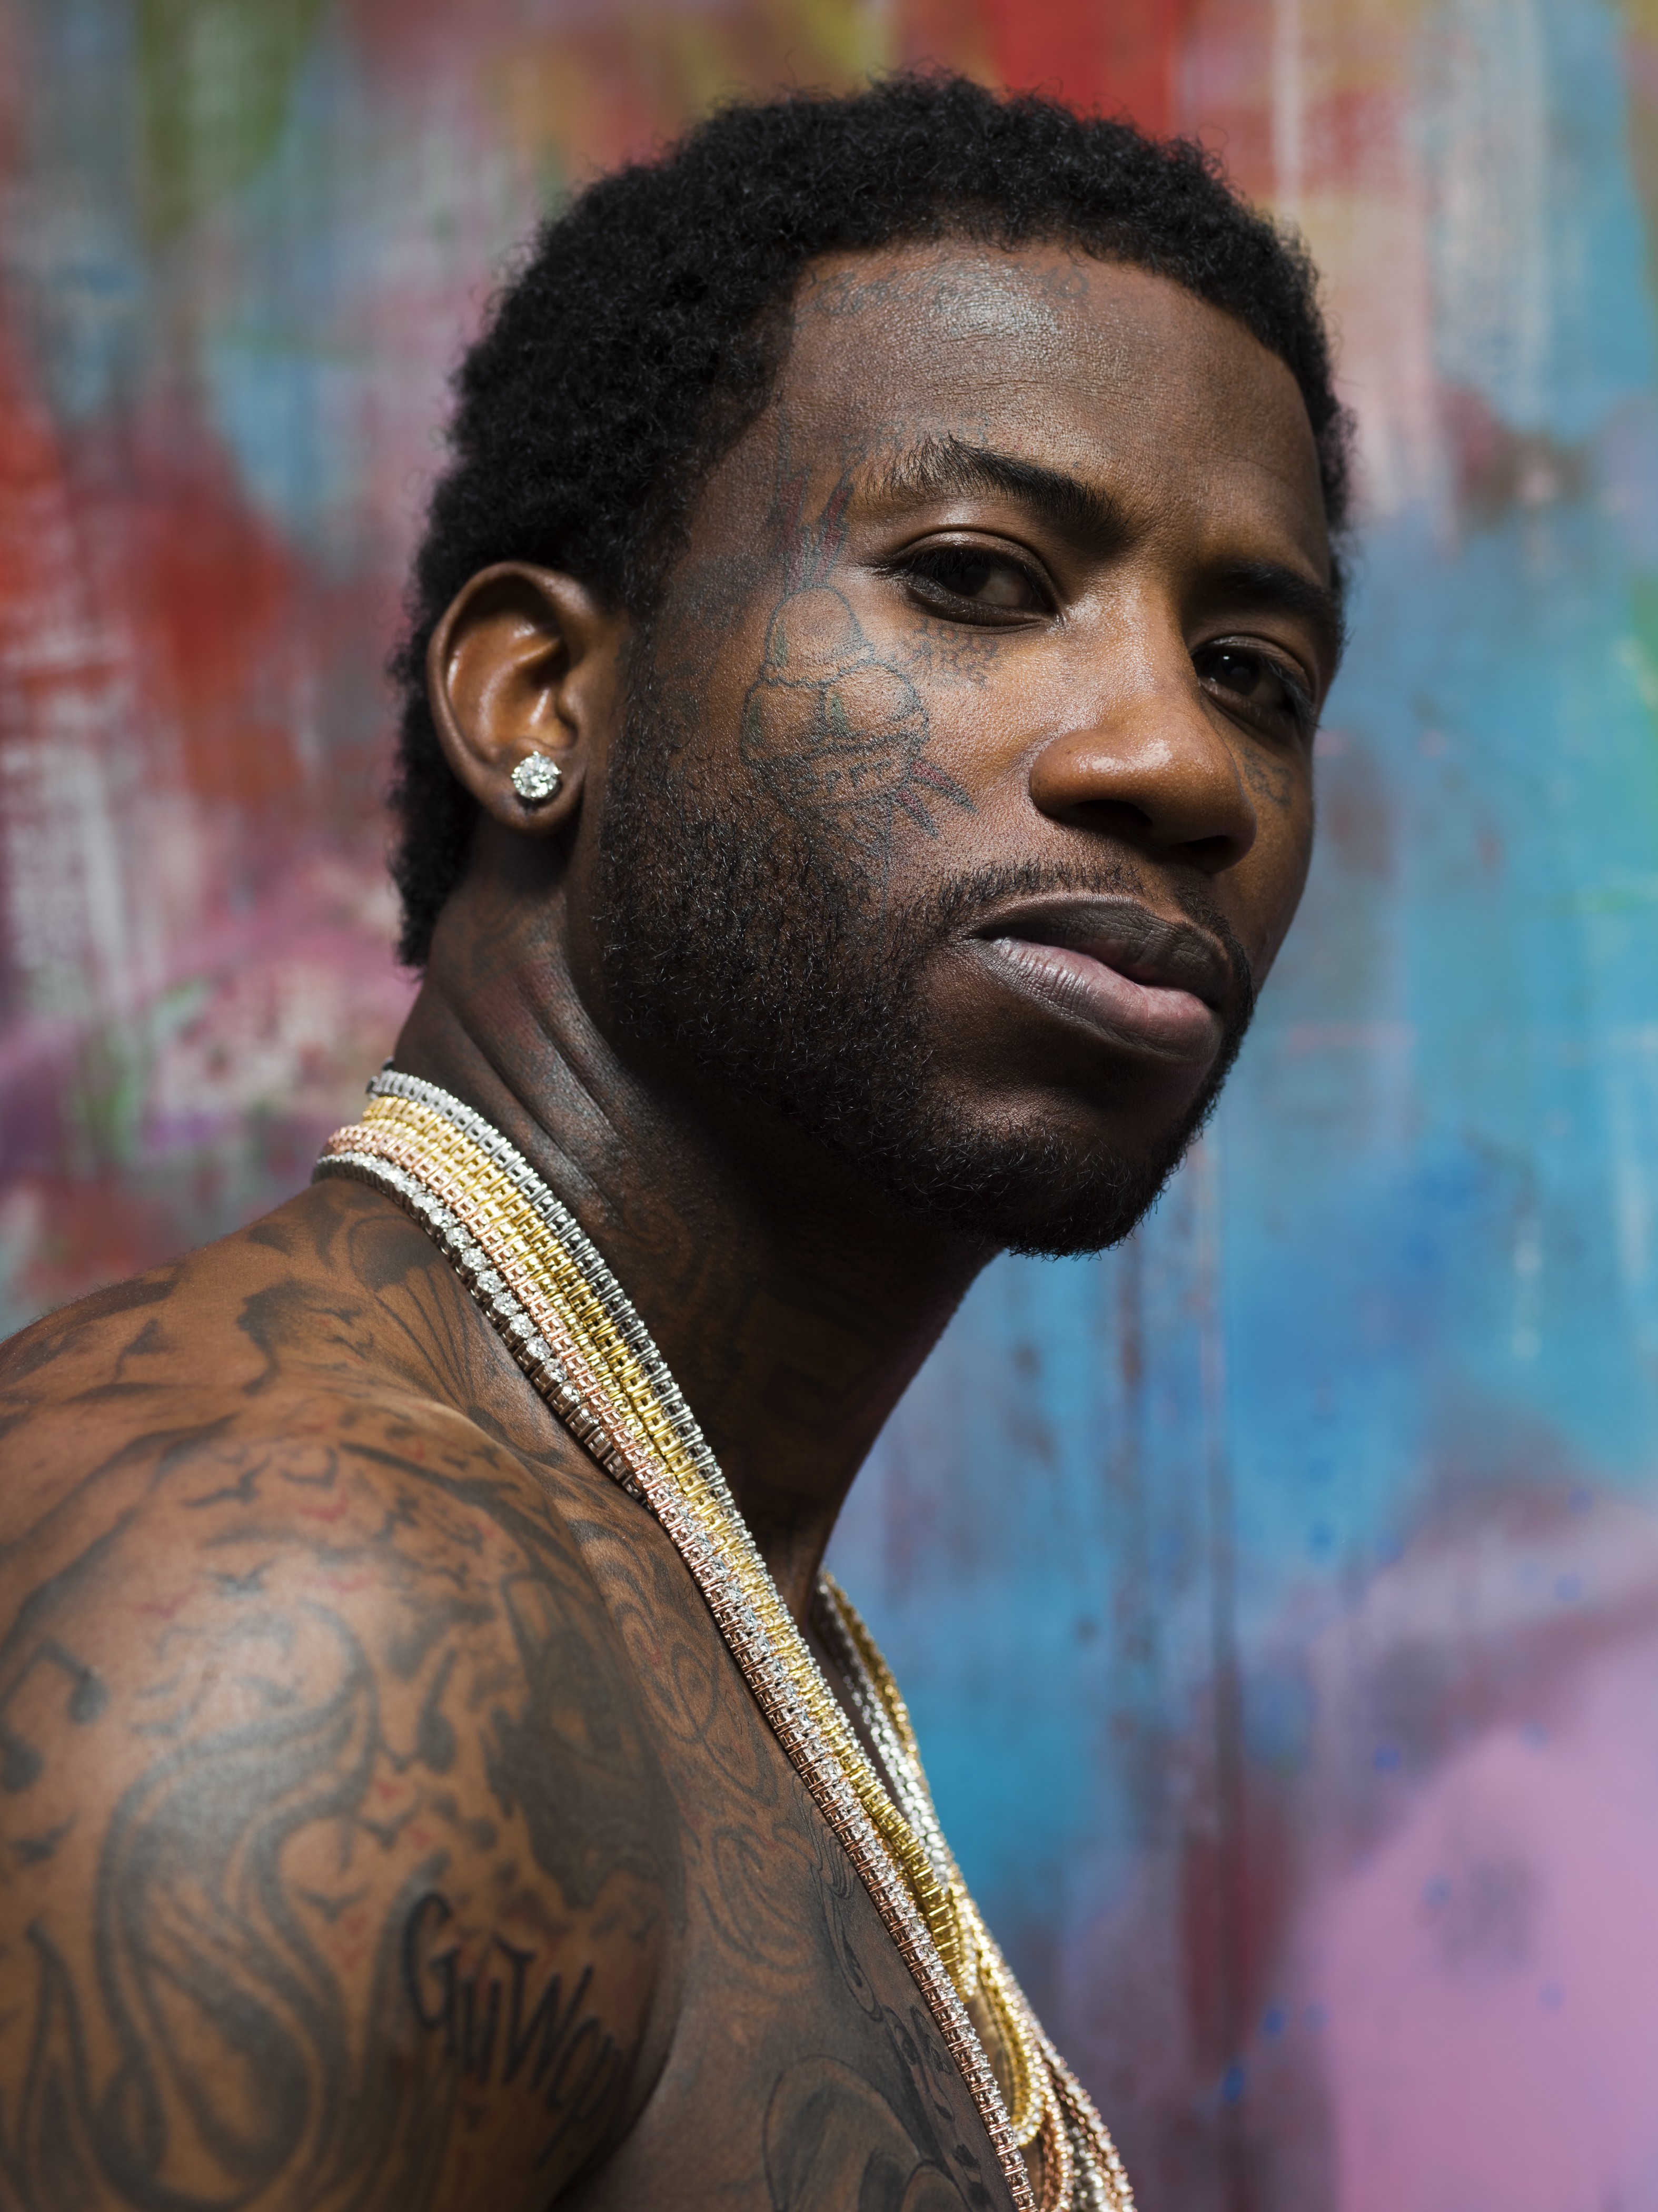 Gucci Mane is a free man and can see him at Chene Park this Sunday | City Slang